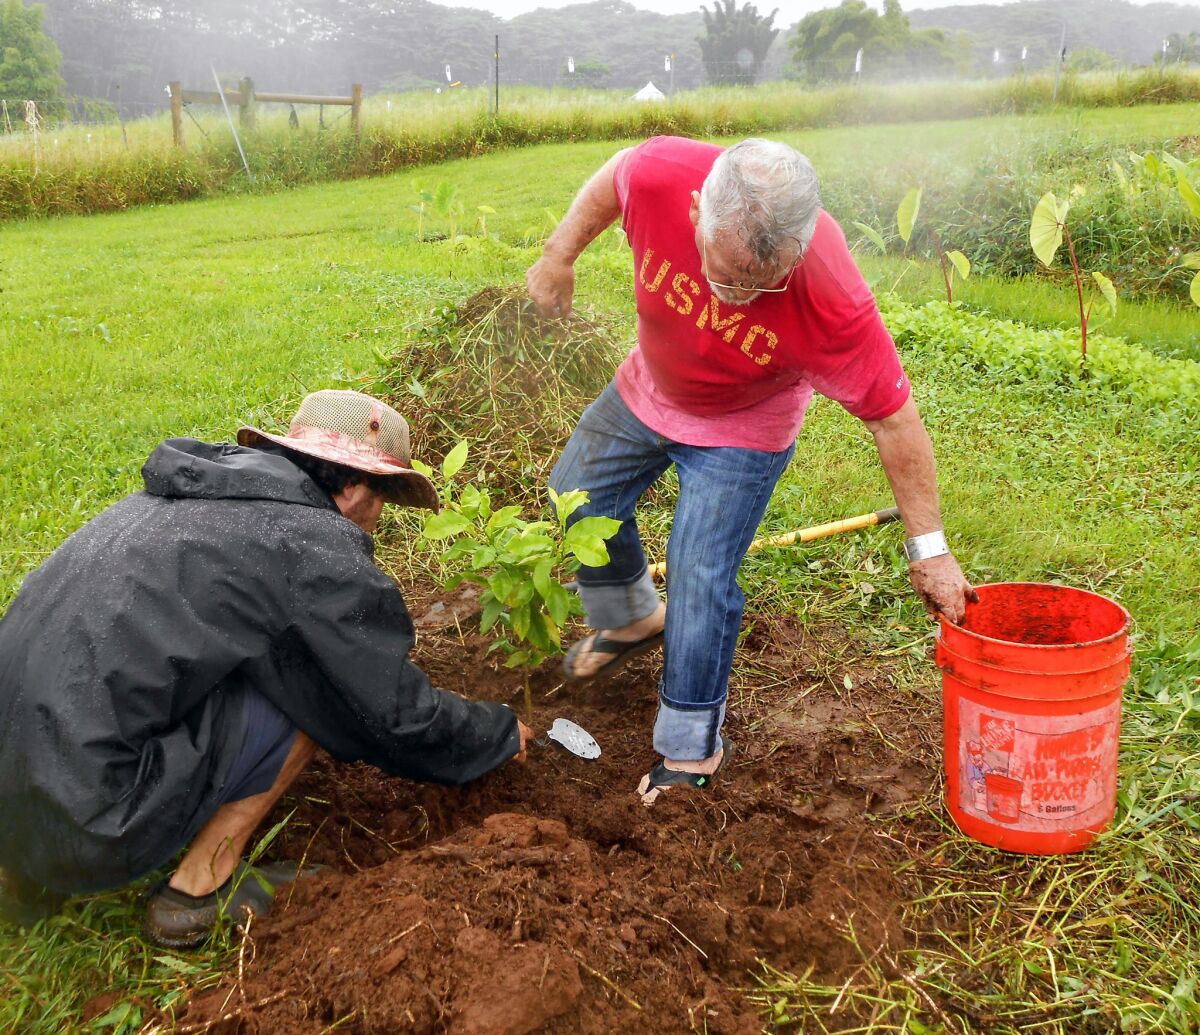 Ethan Hodek, then one of the guides and staff members at the Inn at Kulaniapia Falls, helps one of the vets plant a tree in remembrance of a fallen military comrade.